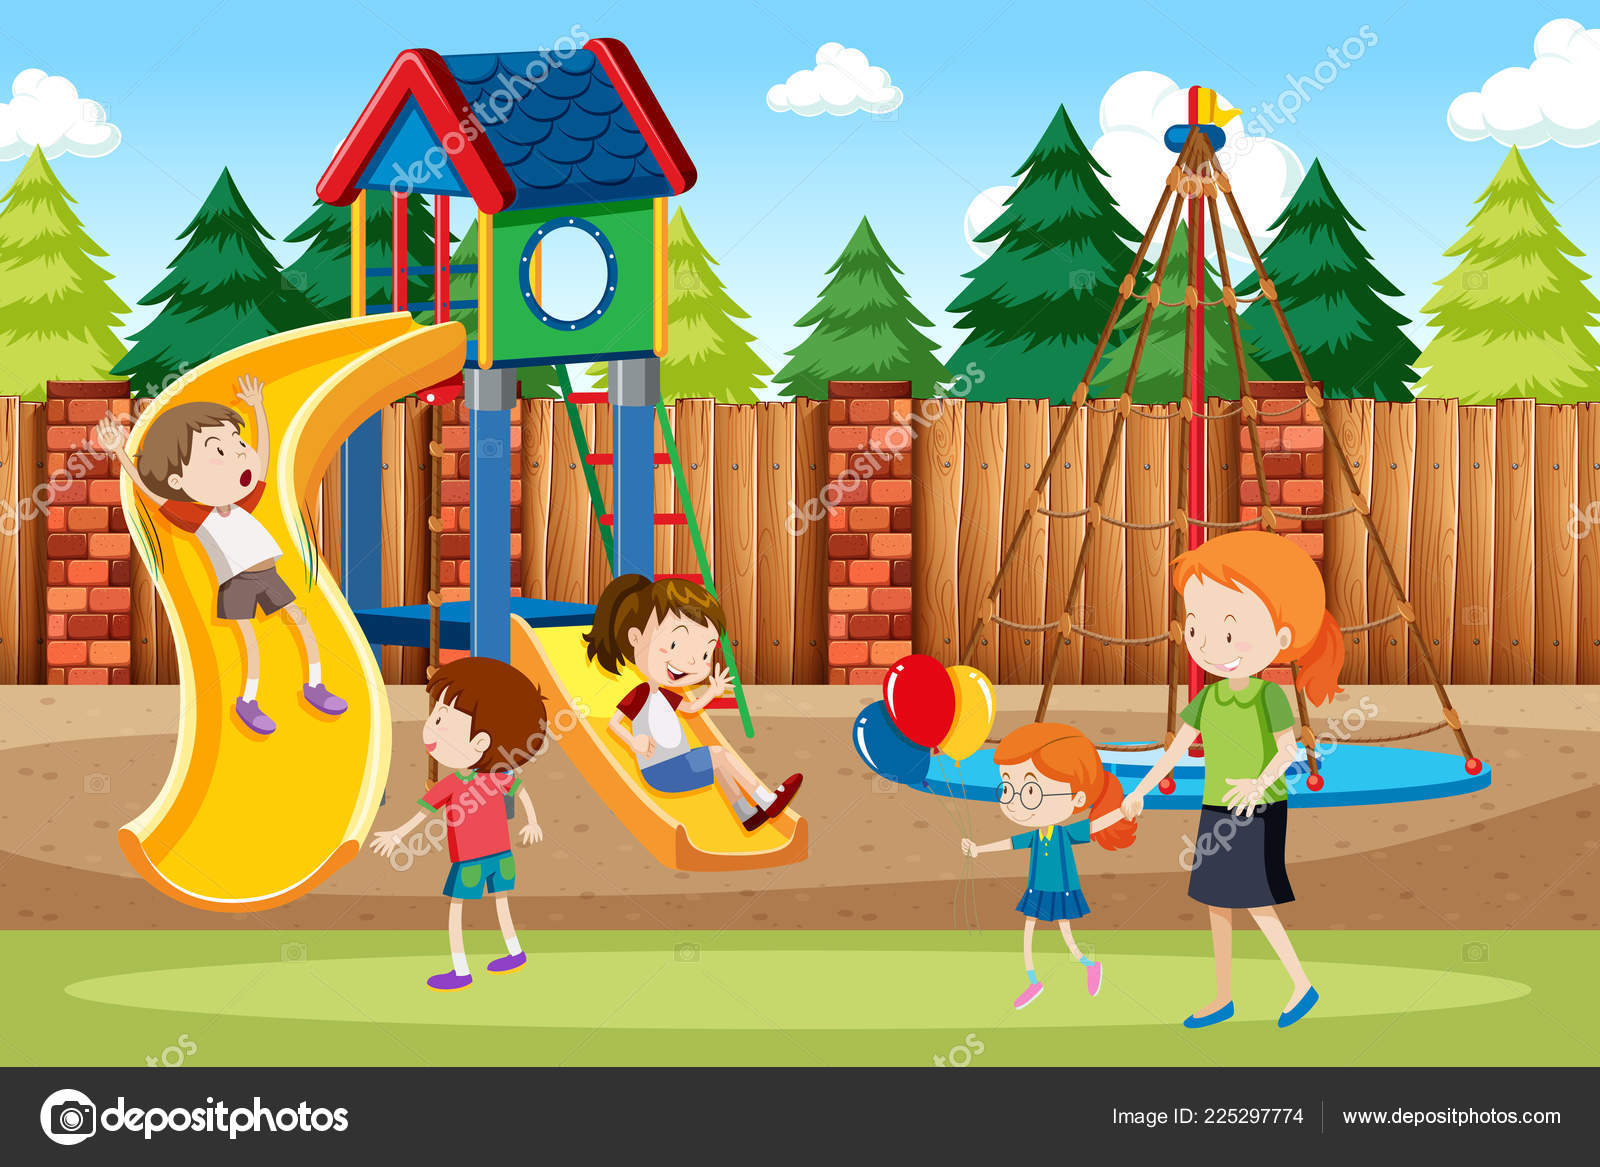 People Playground Illustration Stock Vector By, 44% OFF